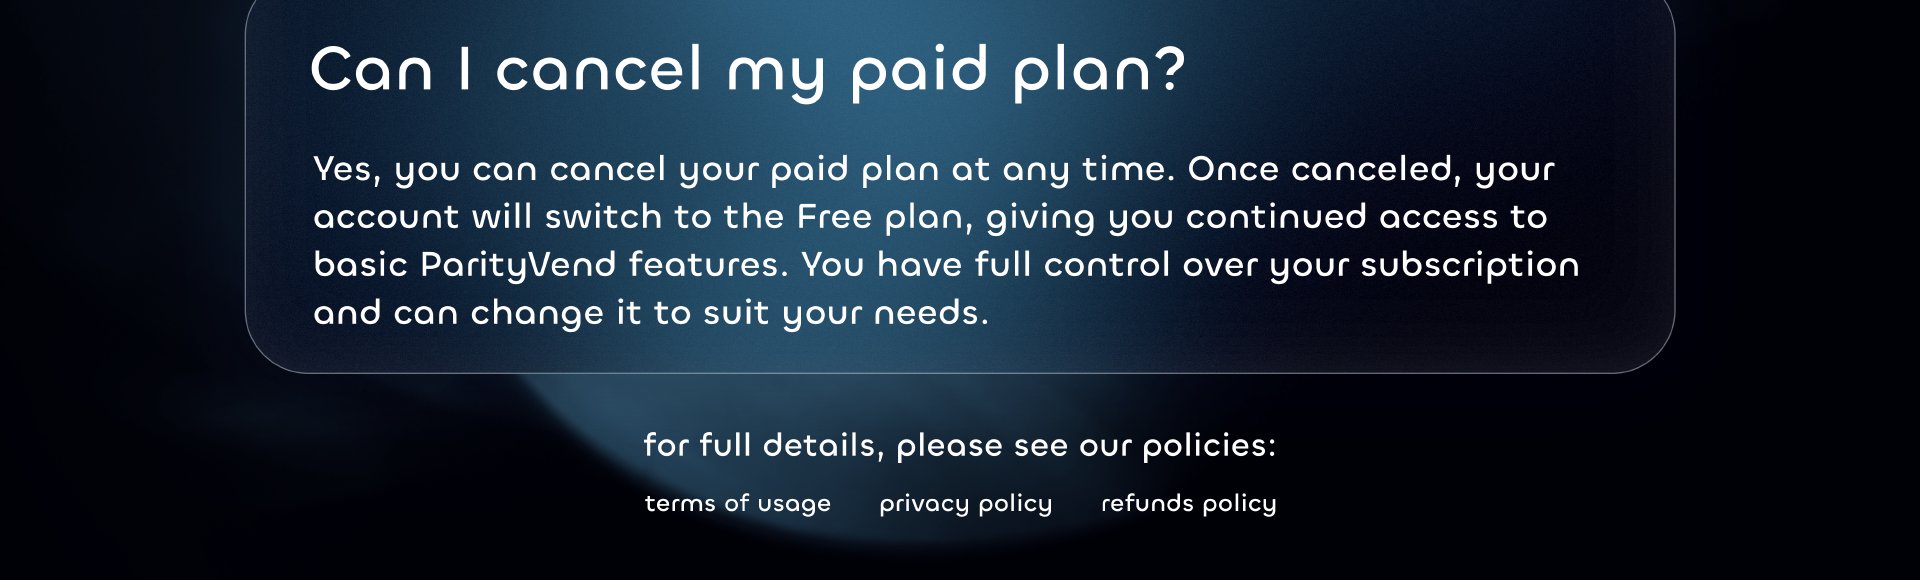 Can I cancel my paid plan?
Yes, you can cancel your paid plan at any time. Once canceled, your account will switch to the Free plan, giving you continued access to basic ParityVend features. You have full control over your subscription and can change it to suit your needs.